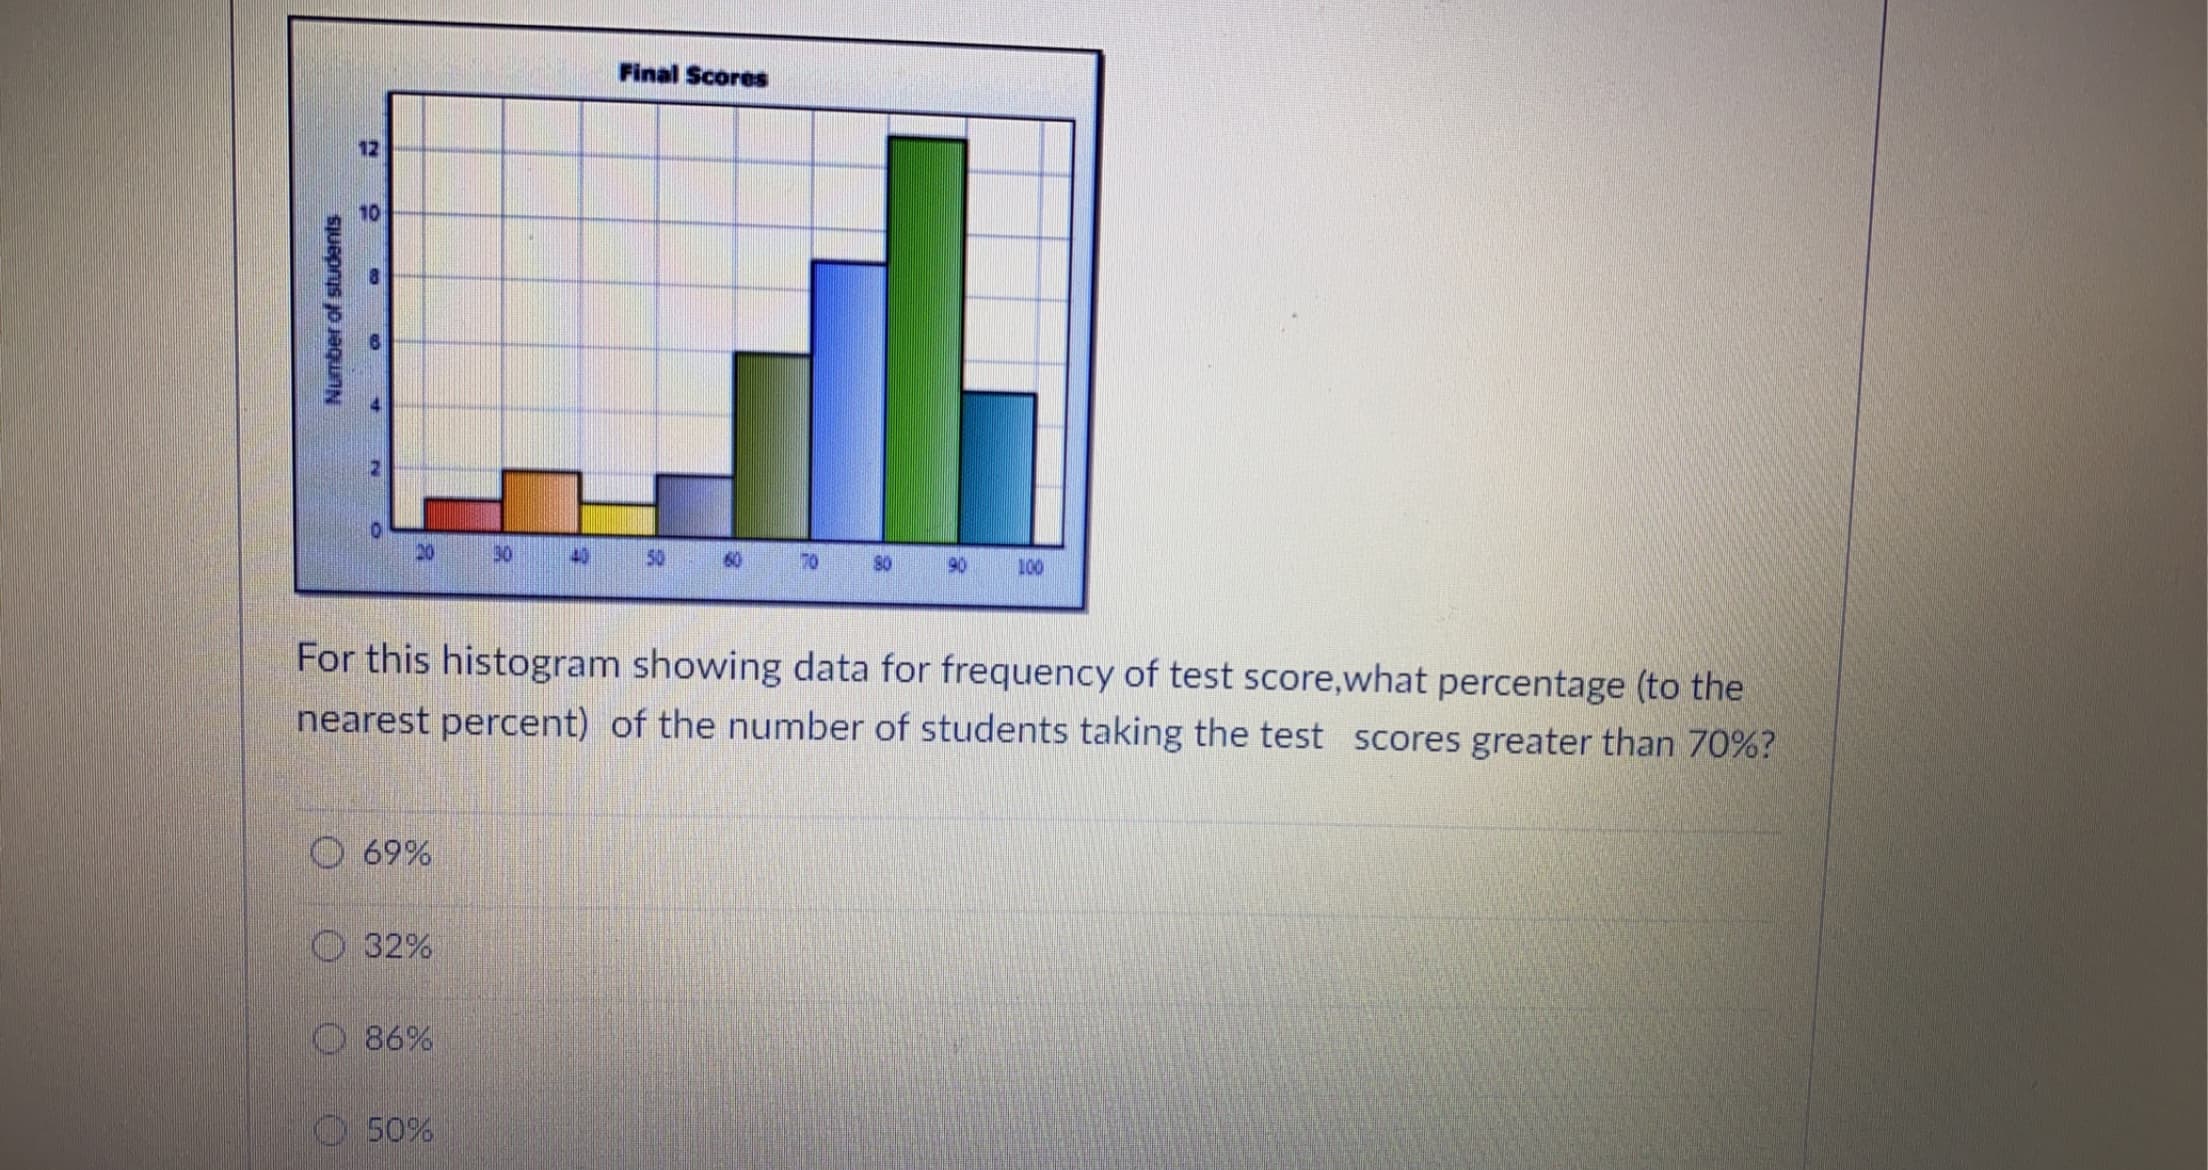 Number of students
Final Scores
12
10
20
30
40
50
60
70
80
90
100
For this histogram showing data for frequency of test score,what percentag
nearest percent) of the number of students taking the test scores greater
O 69%
32%
O 86%
O 50%
